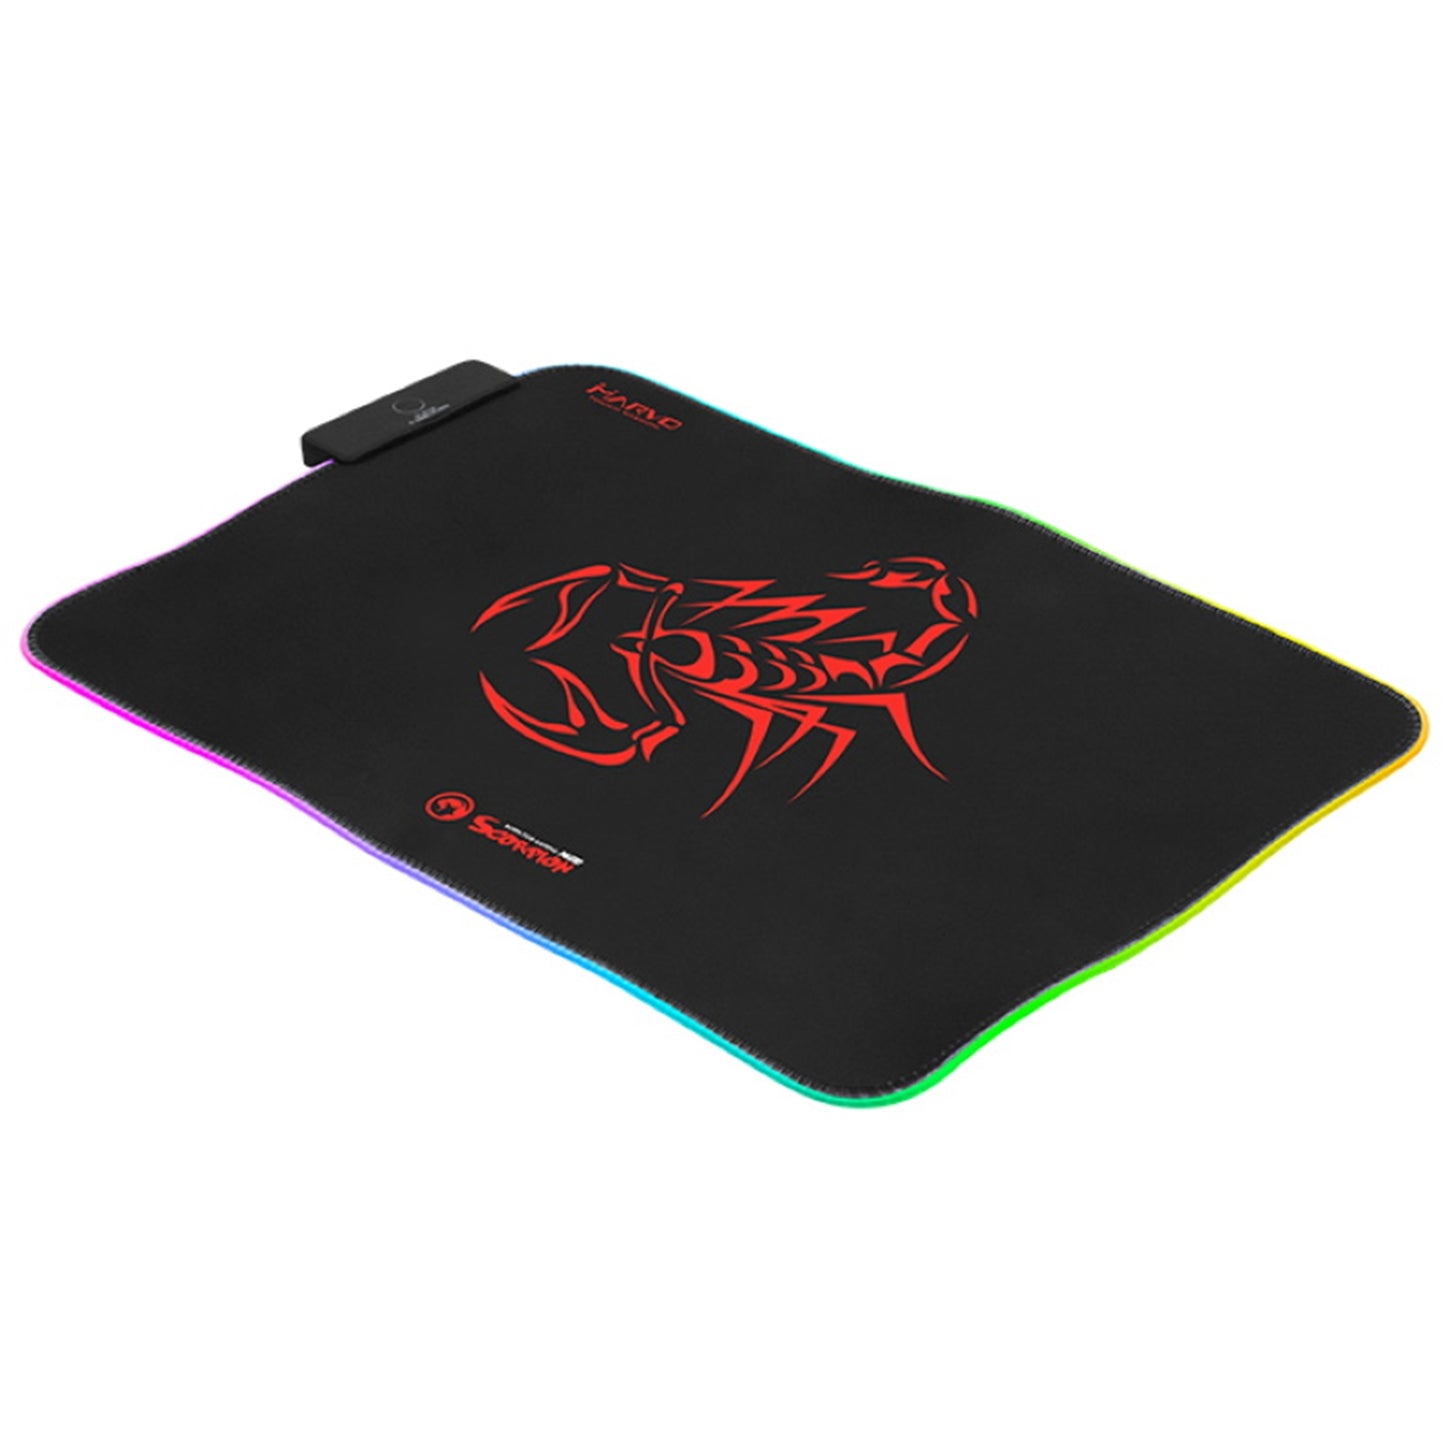 Marvo MG08 Gaming Mouse Pad, 7 Colour LED with 3 RGB Effects, Medium 350x250x4mm, USB Connection